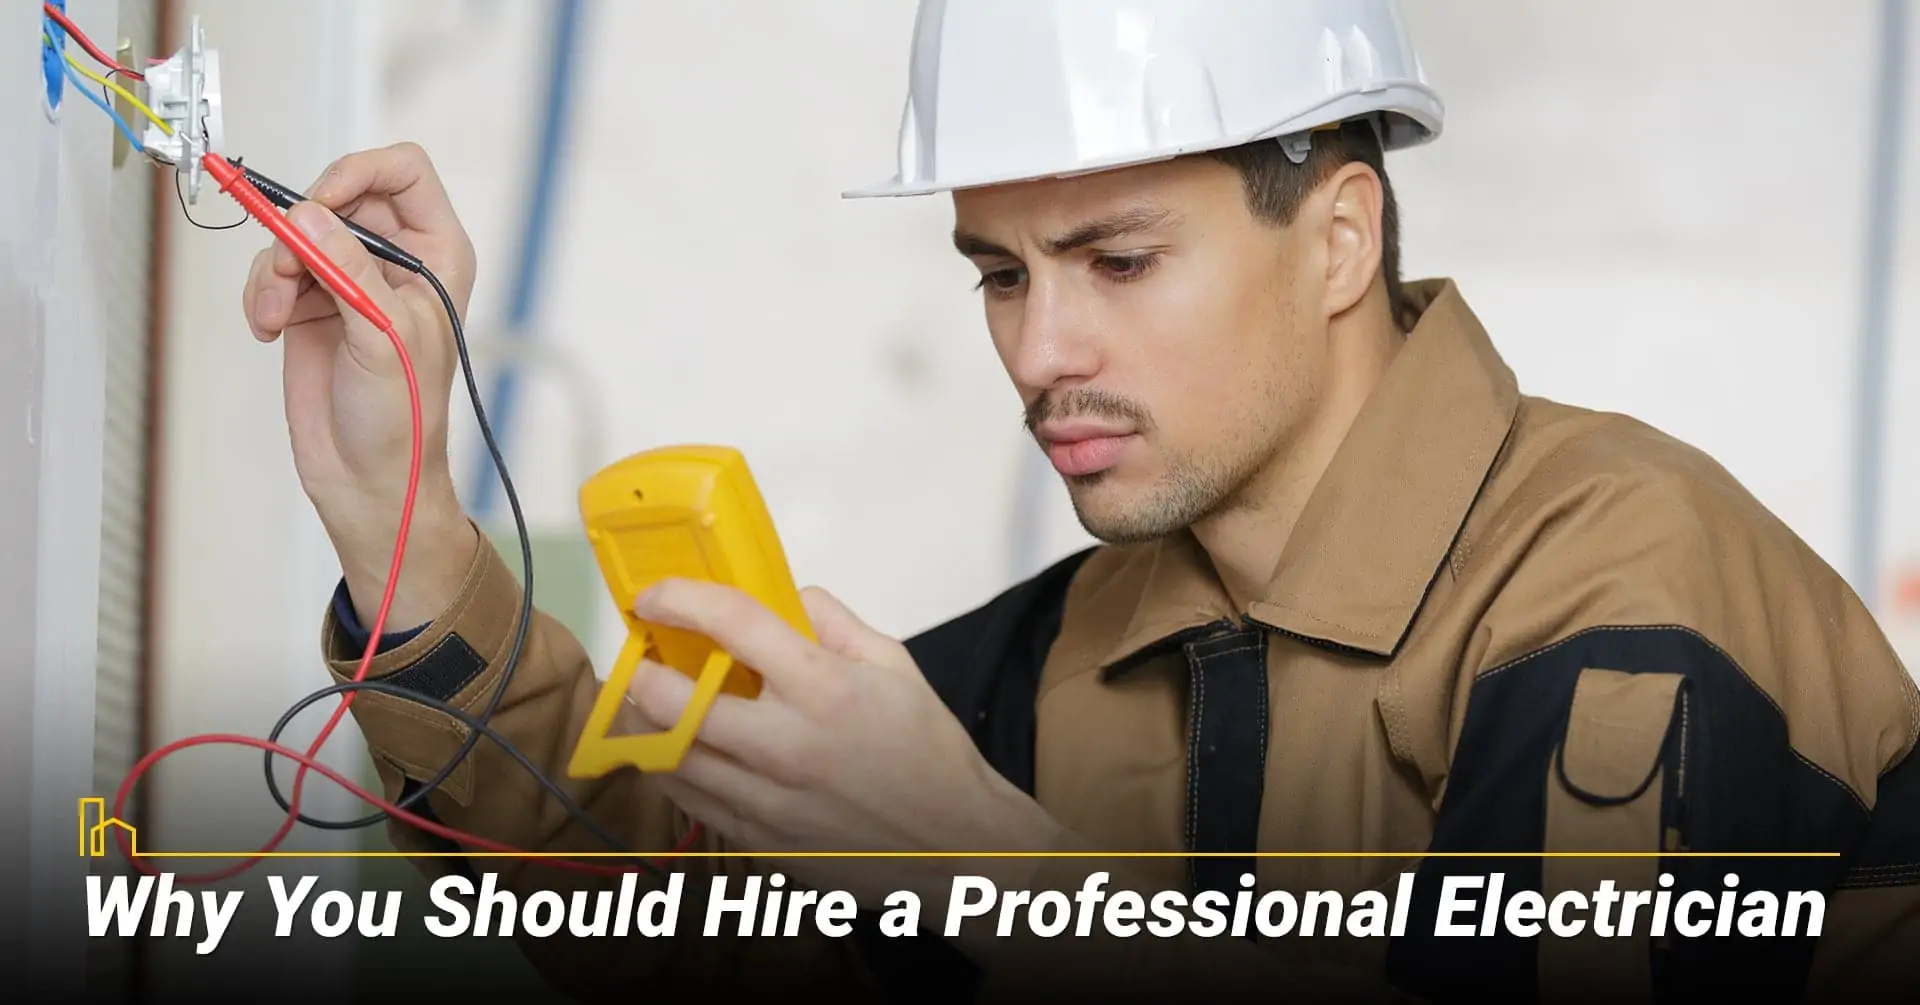 Why You Should Hire a Professional Electrician, reasons to hire a professional electrician